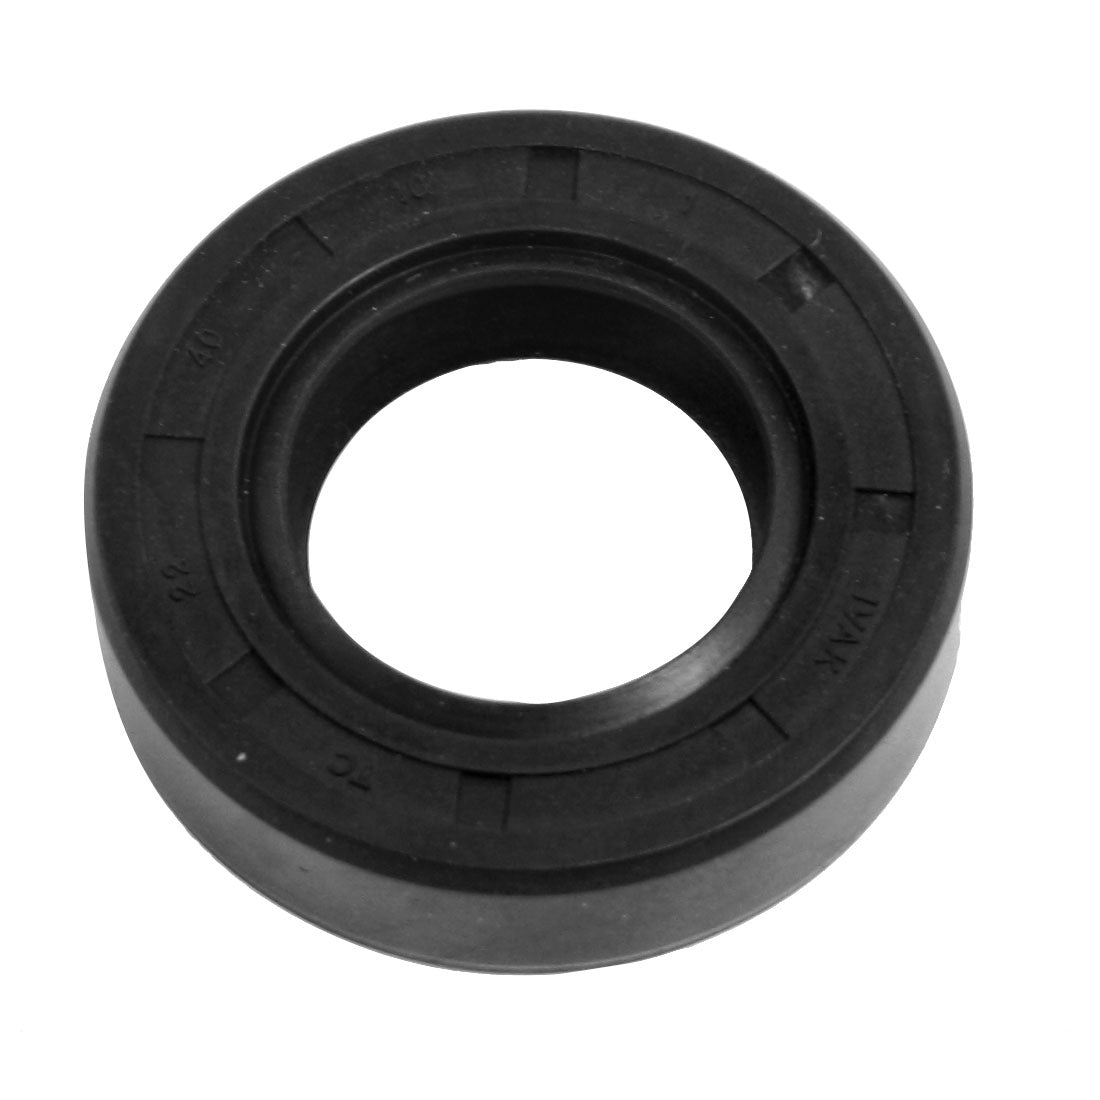 uxcell Uxcell Steel Spring NBR Double Lip TC Oil Shaft Seal 22mm x 40mm x 10mm